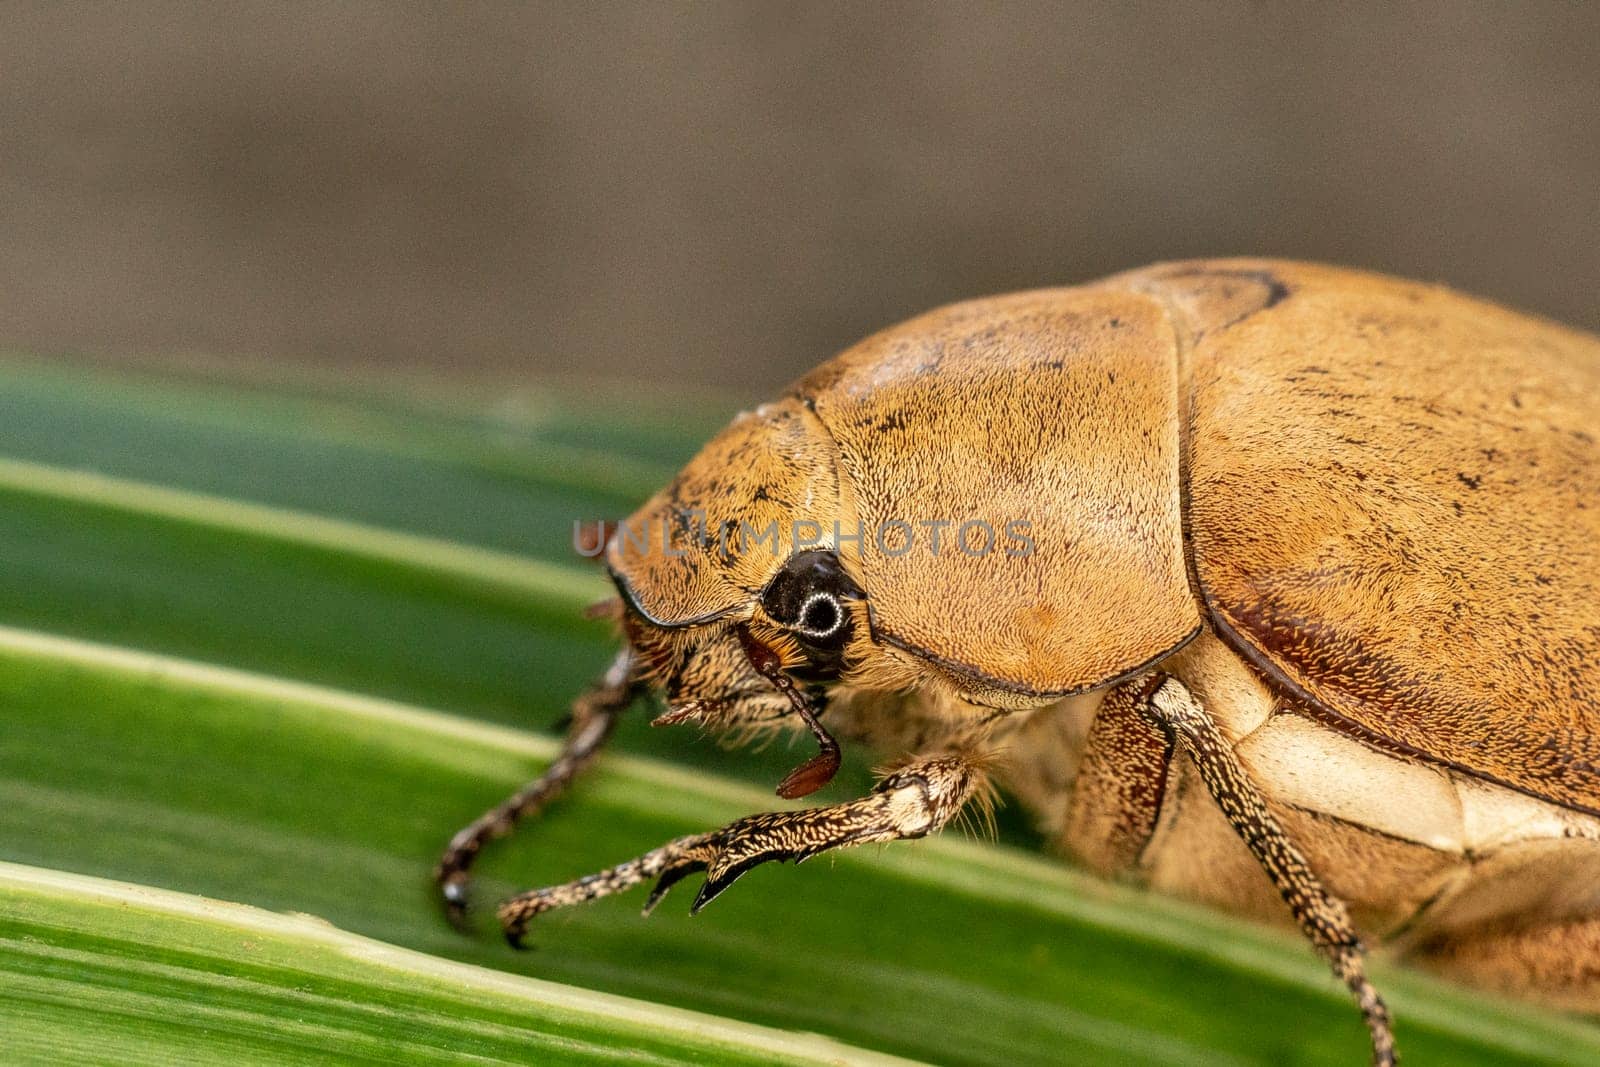 Close up light brown large Insect beetle. Interaction with wild nature beauty fauna Entomology image.